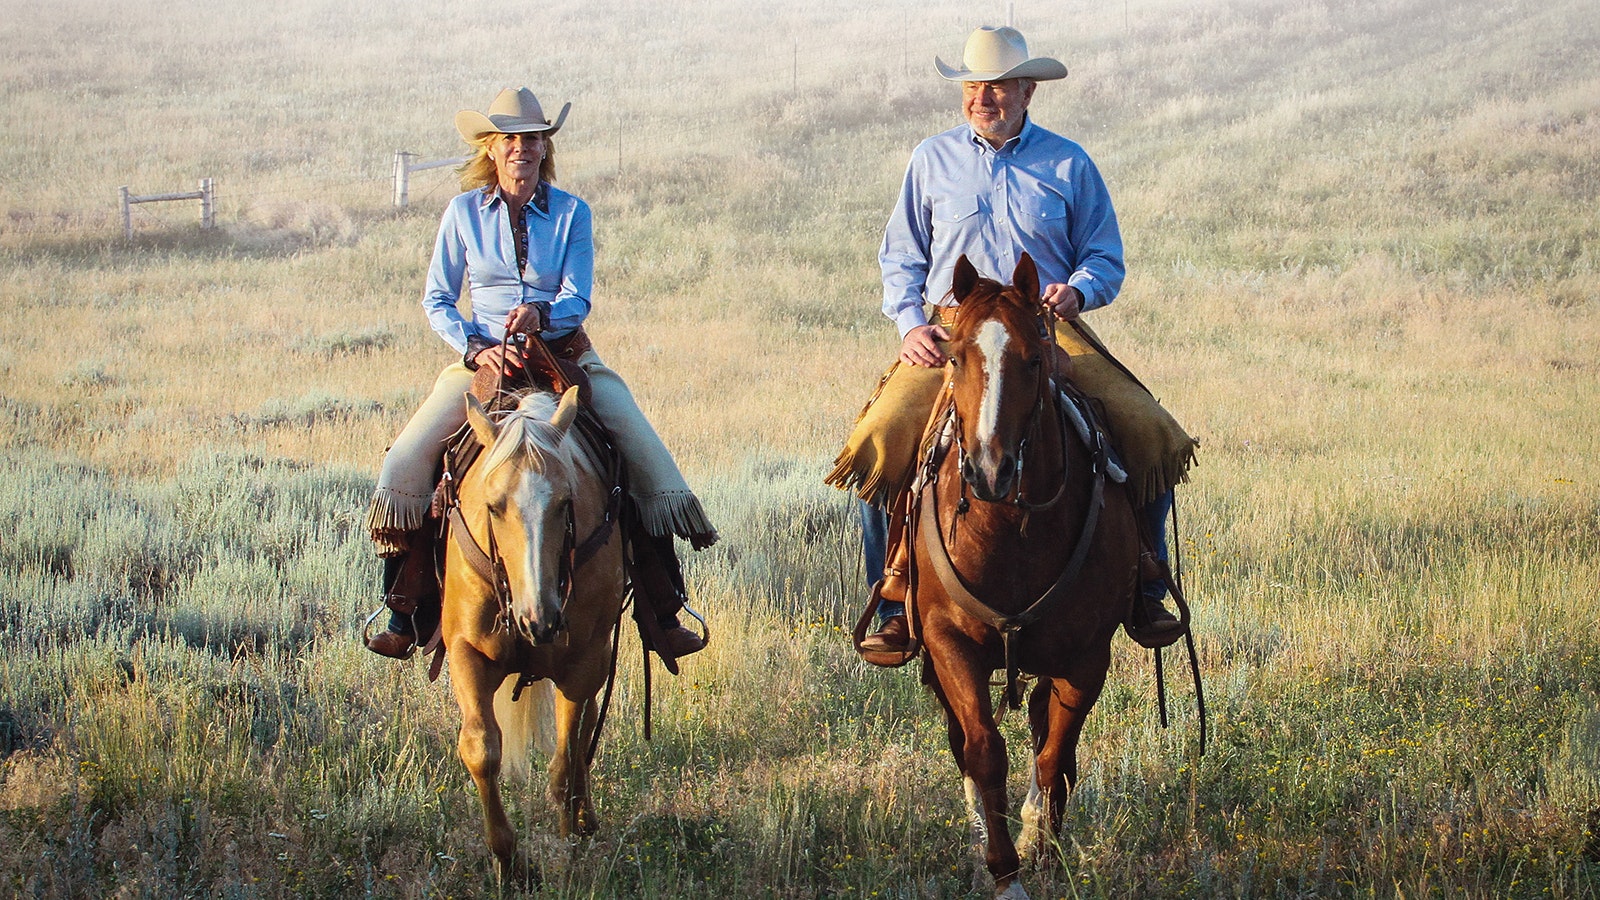 Catherine and Art Nicholas are the owners of Wagonhound Land and Livestock near Douglas. The couple recently presented a $2.5 million gift to the University of Wyoming that will empower the university’s Ranch Management and Agricultural Leadership Program.